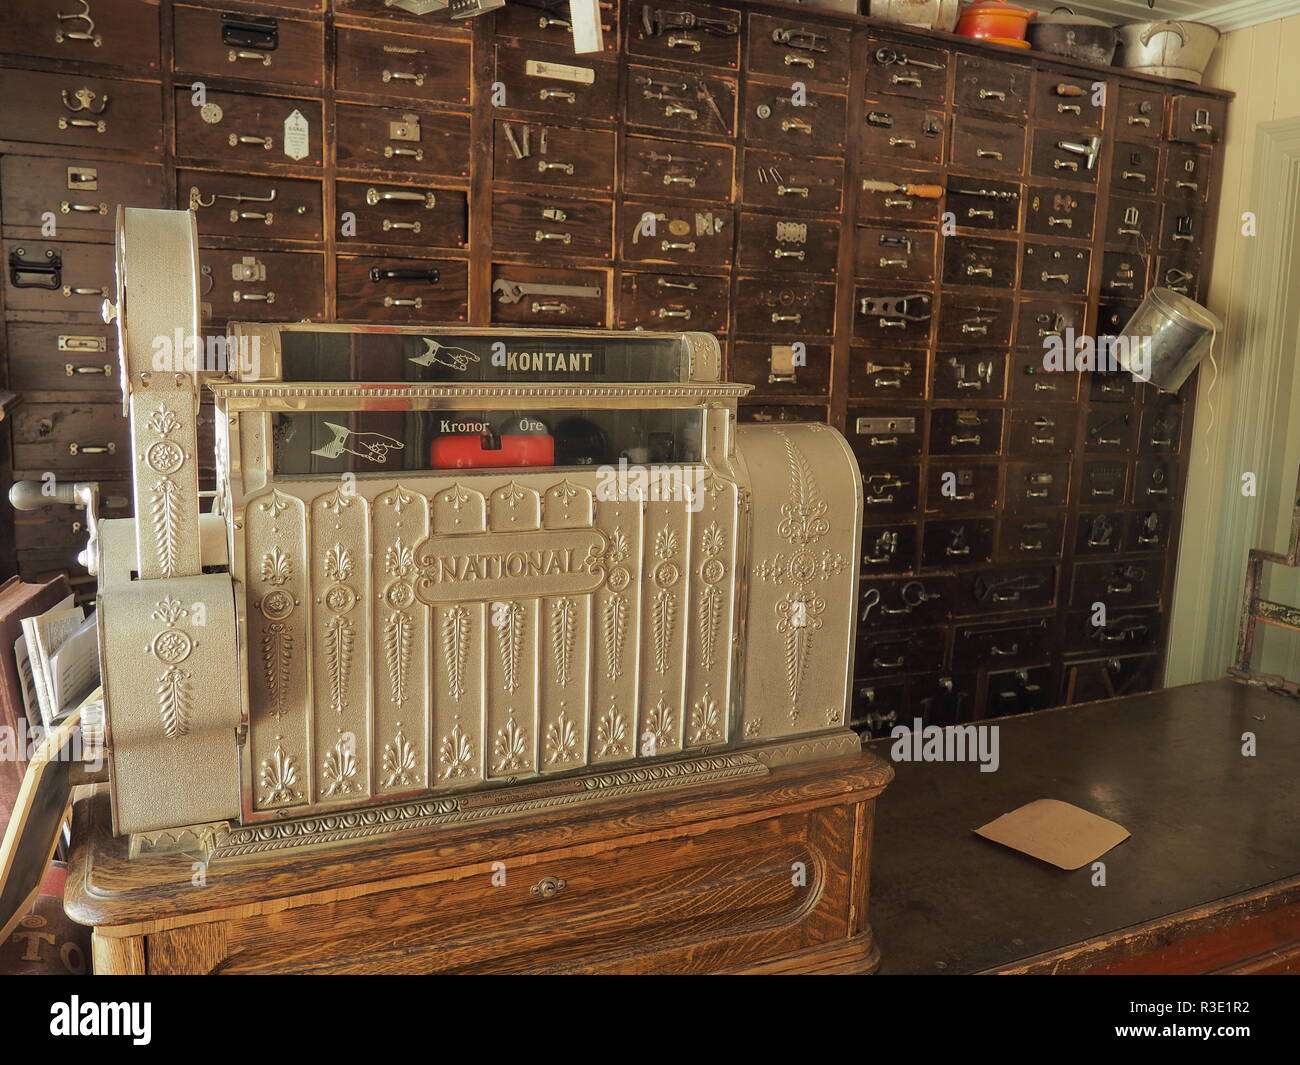 The old cash box in the vintage pharmacy. Taken in some Swedish historical park. Stock Photo